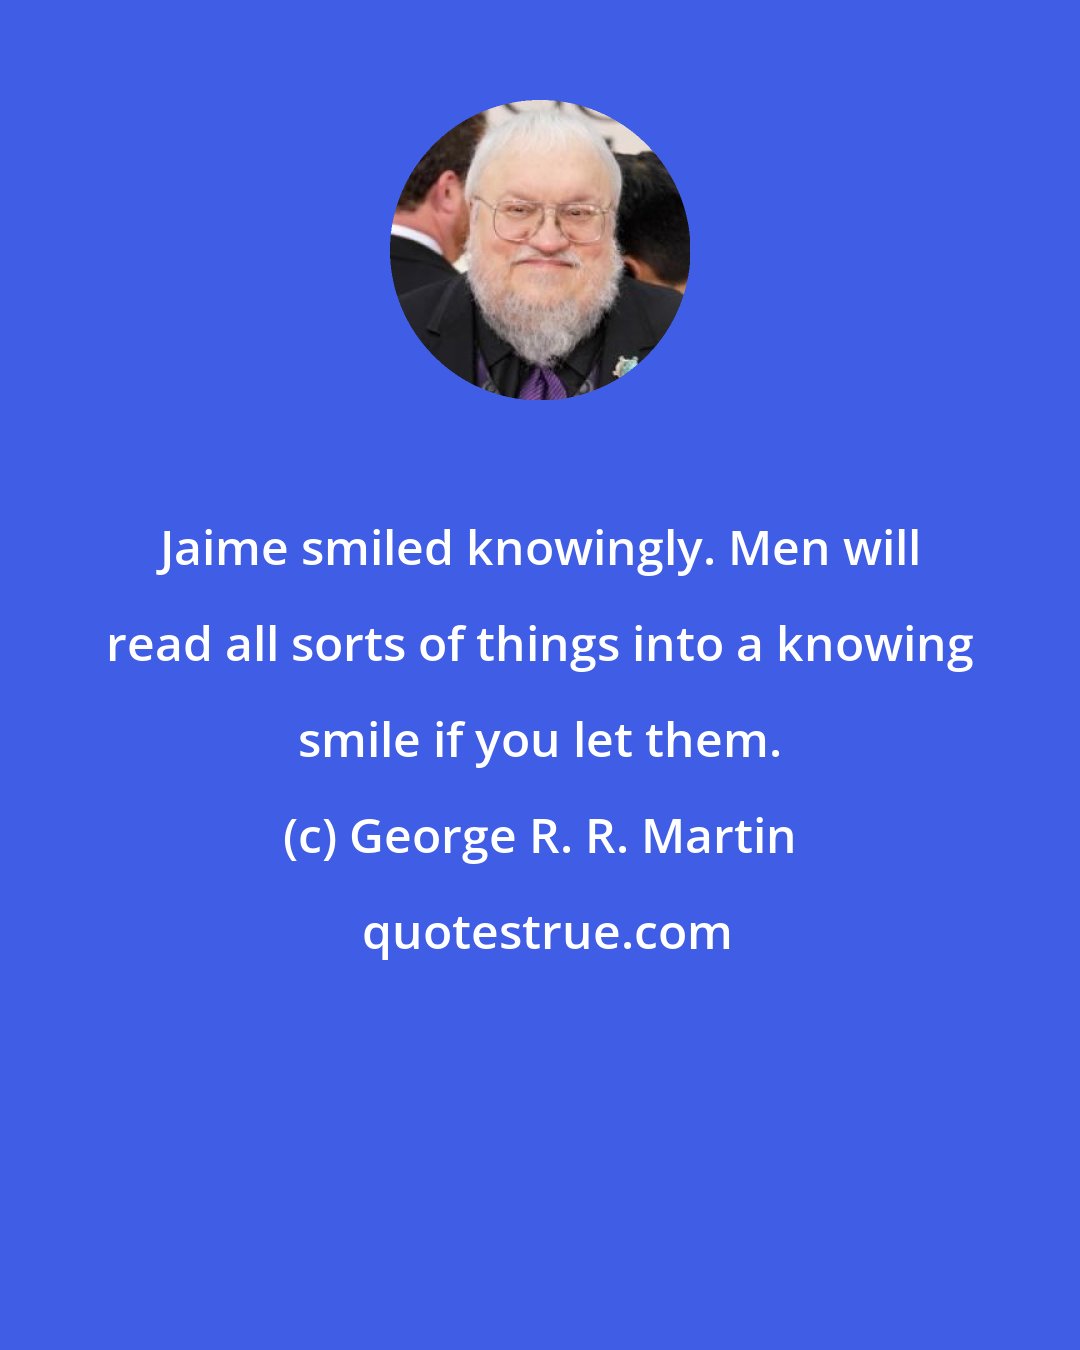 George R. R. Martin: Jaime smiled knowingly. Men will read all sorts of things into a knowing smile if you let them.